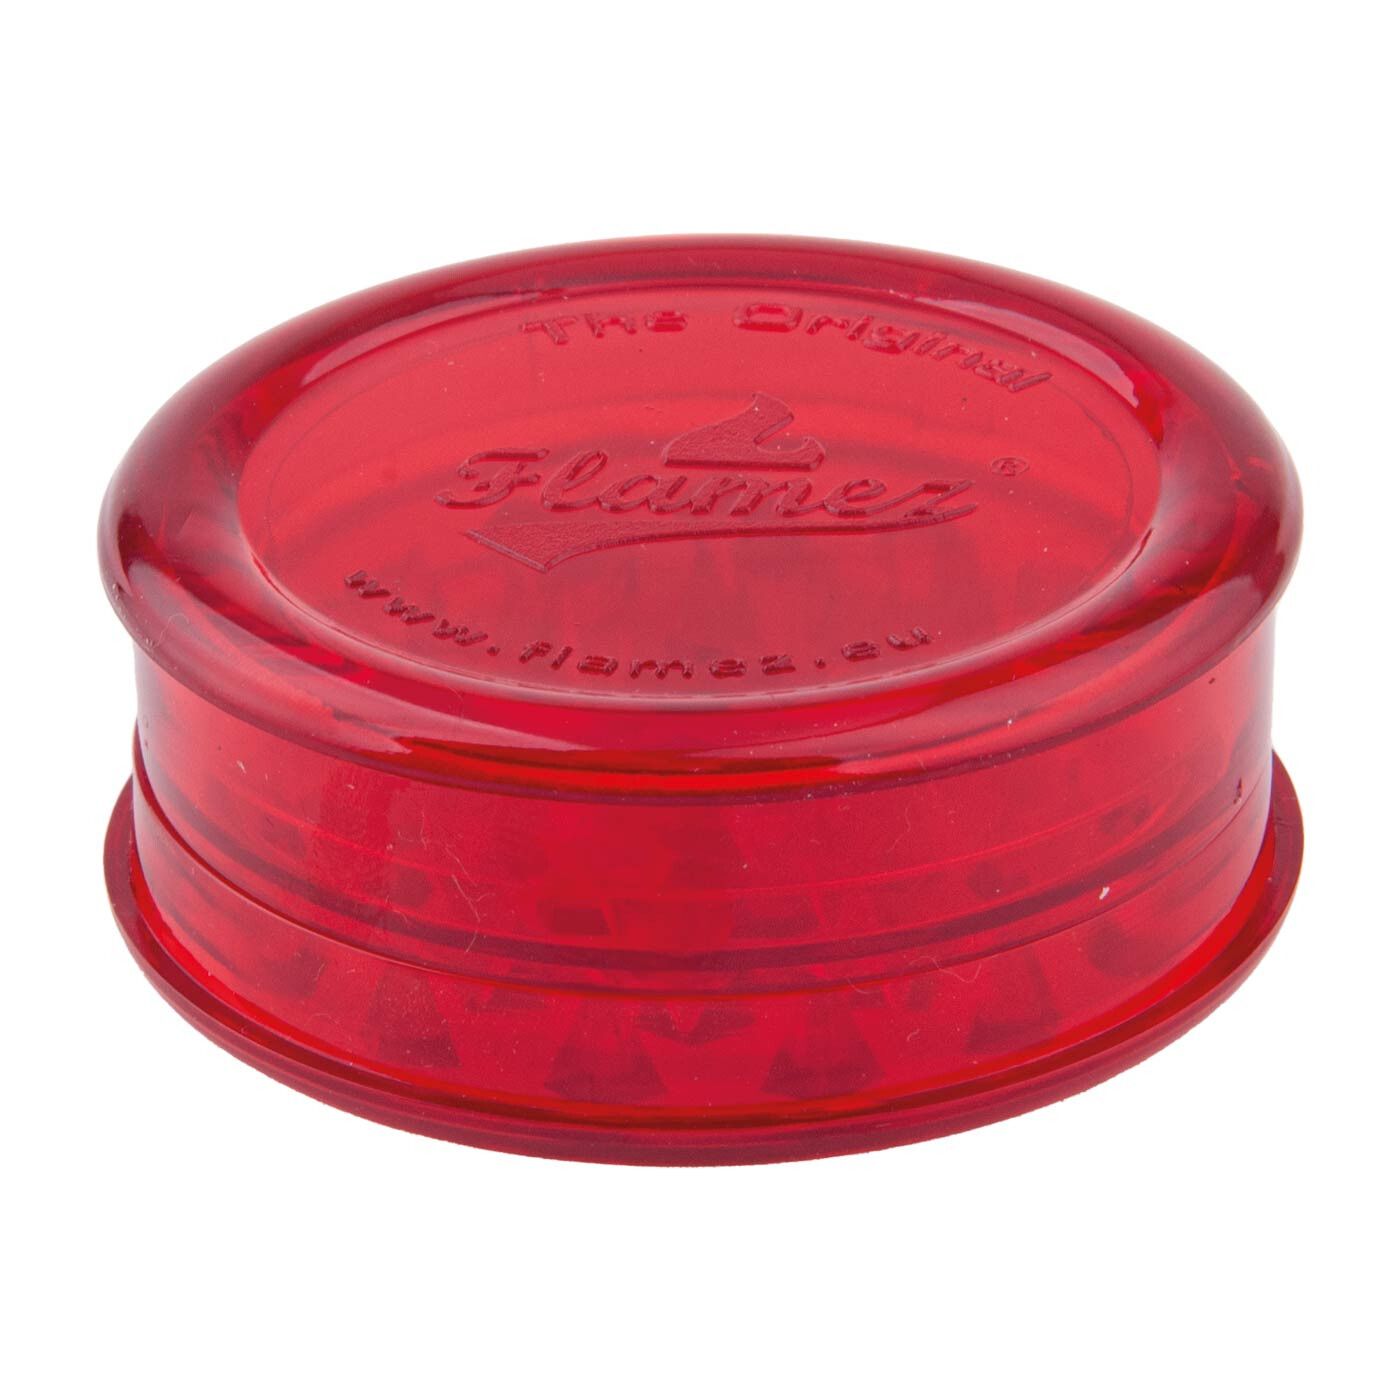 Acrylic Super Grinder With Stash Compartment Red